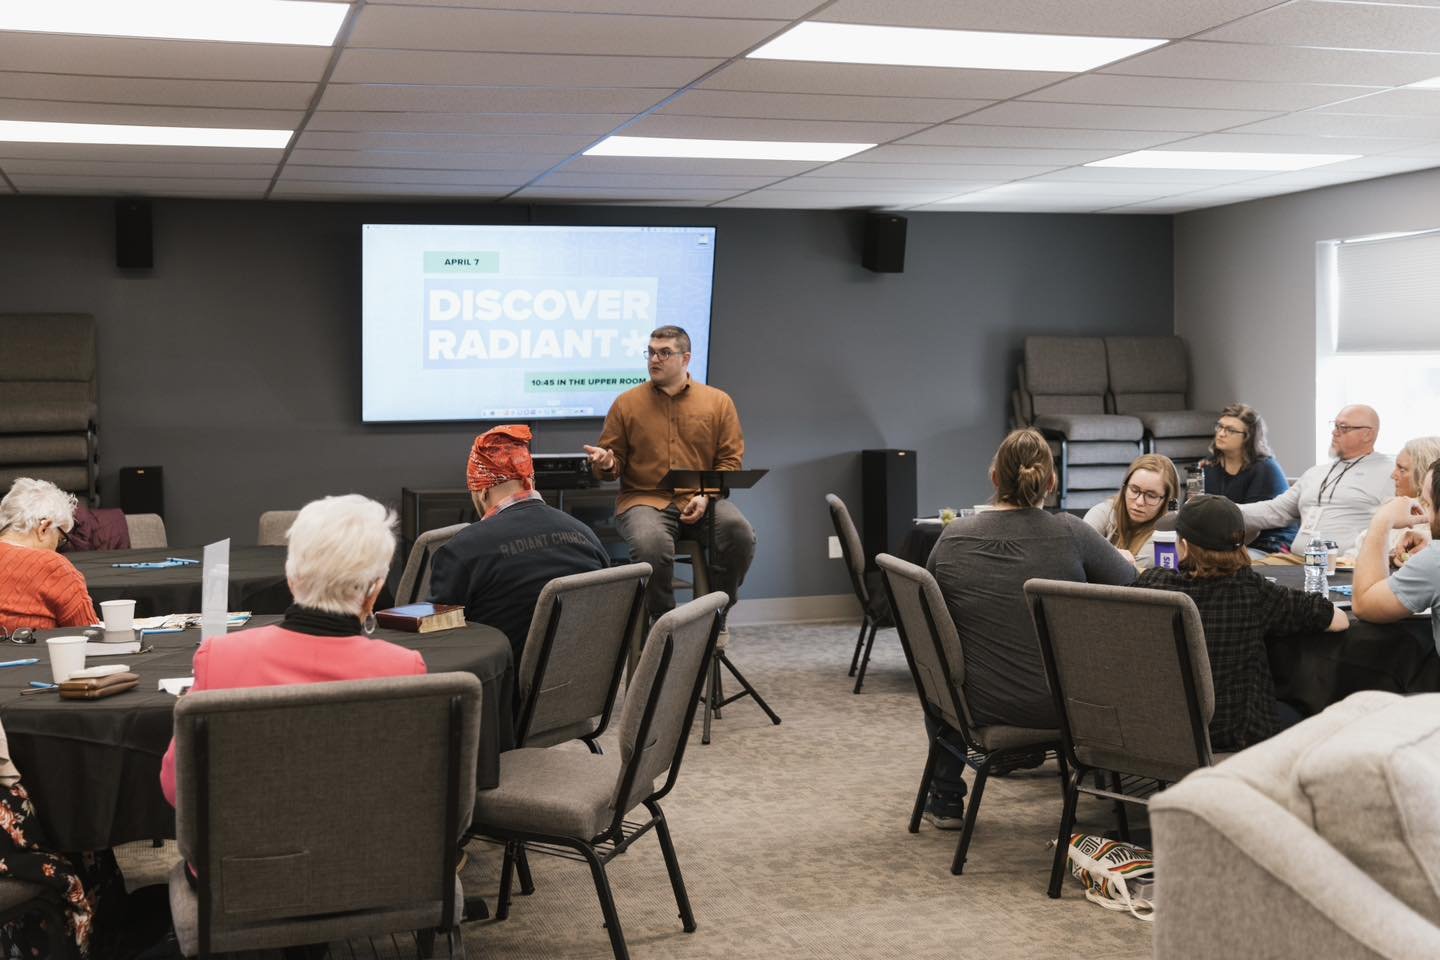 If you are new to Radiant or looking to get more involved, we would love to connect with you in our Upper Room meeting space on May 26th, beginning at 10:45 AM. The Discover Radiant Meeting is an excellent opportunity to meet with our leadership team